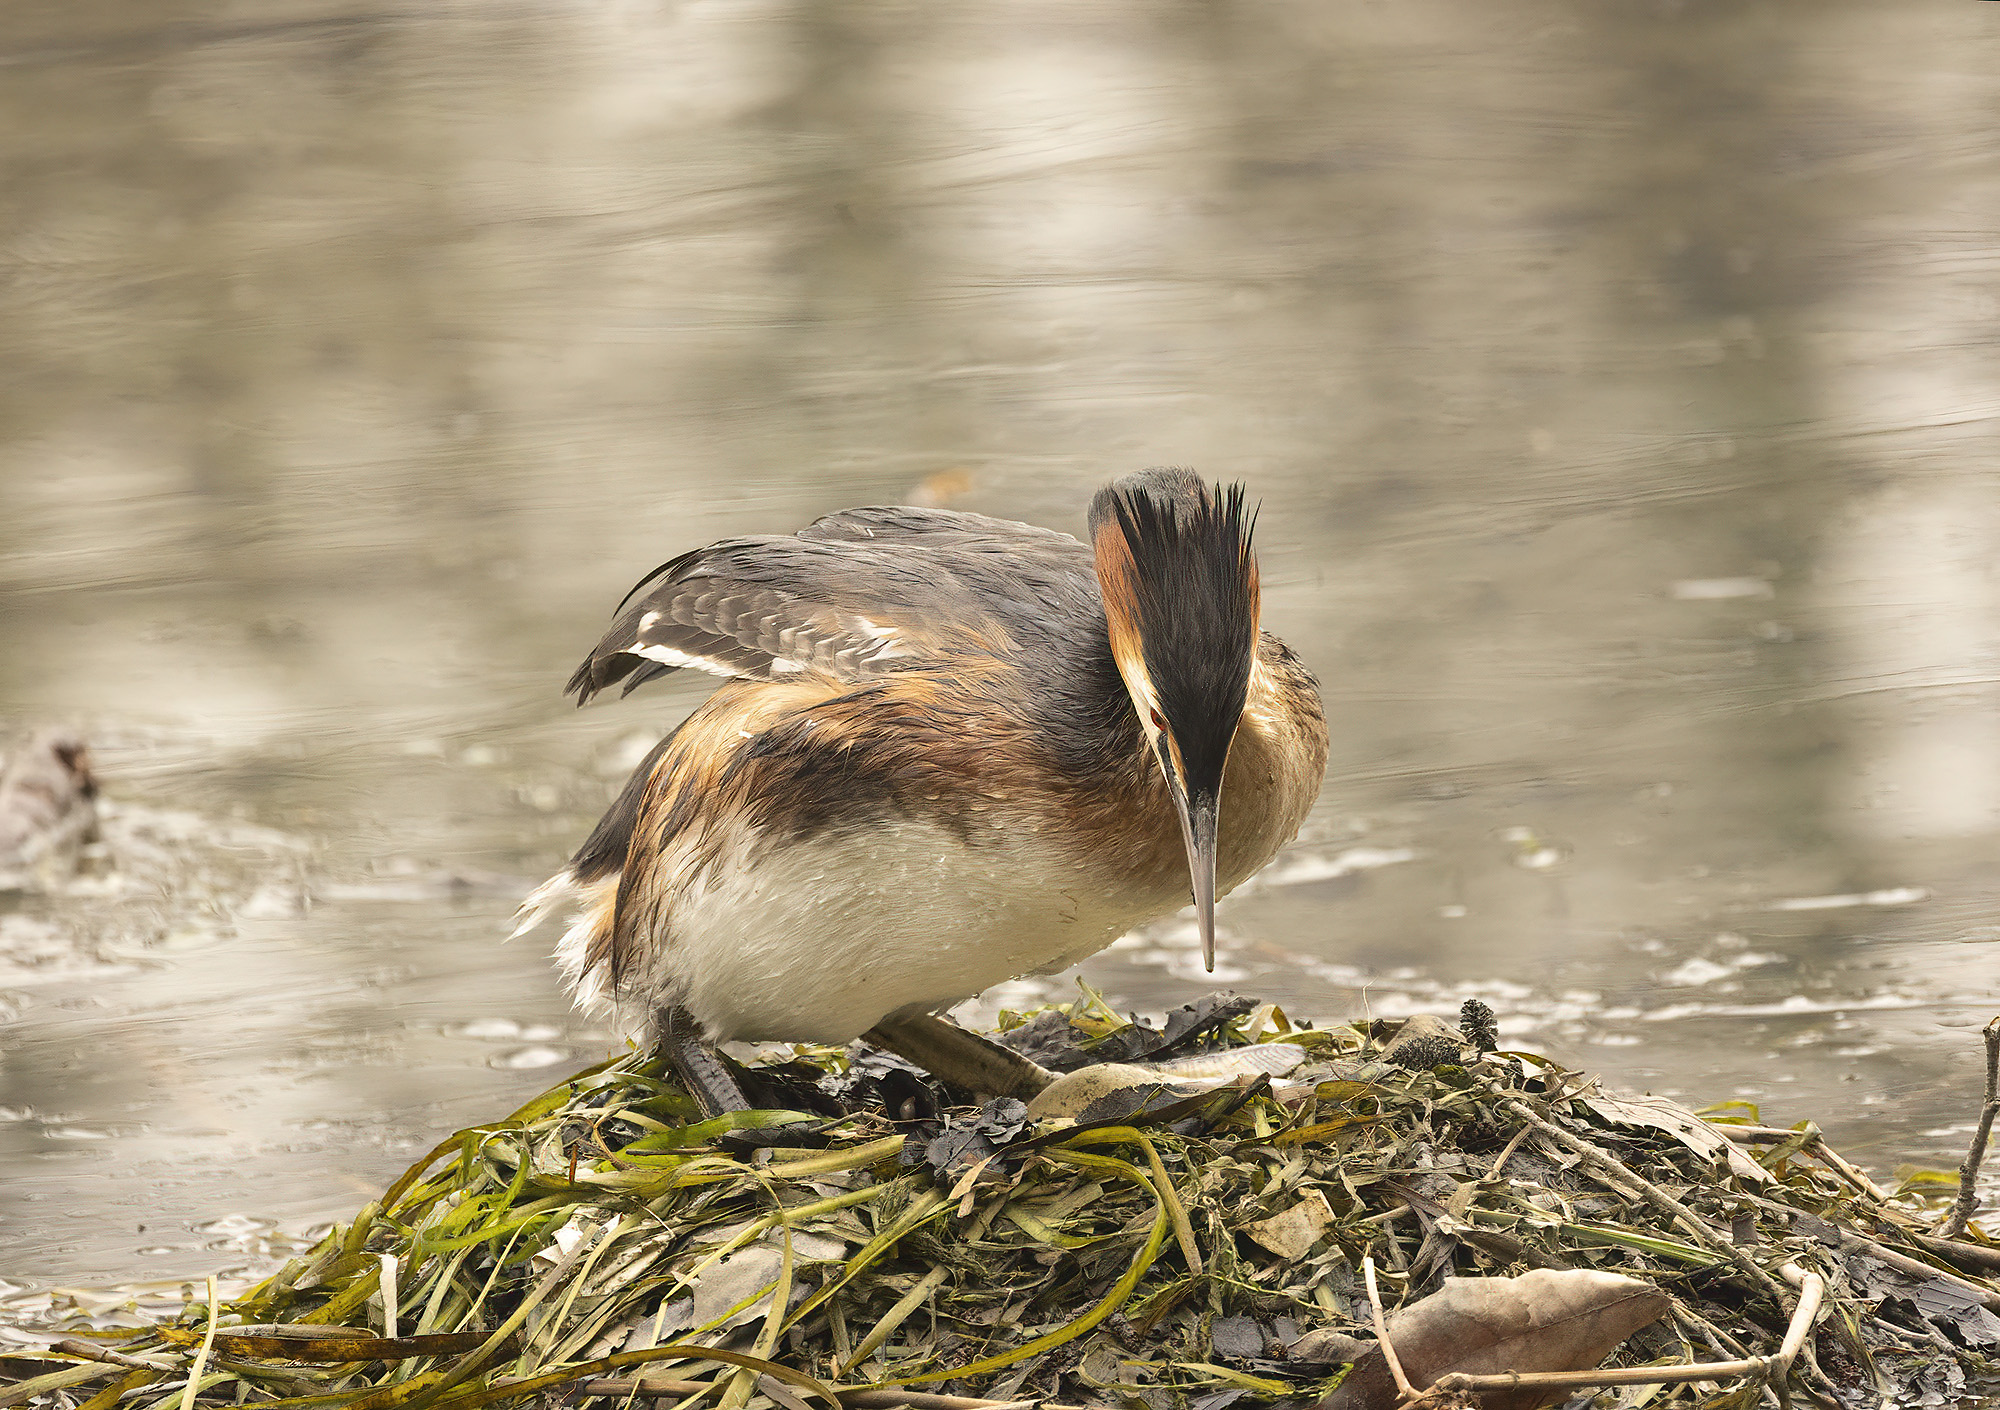 we settle these eggs, greater grebe...